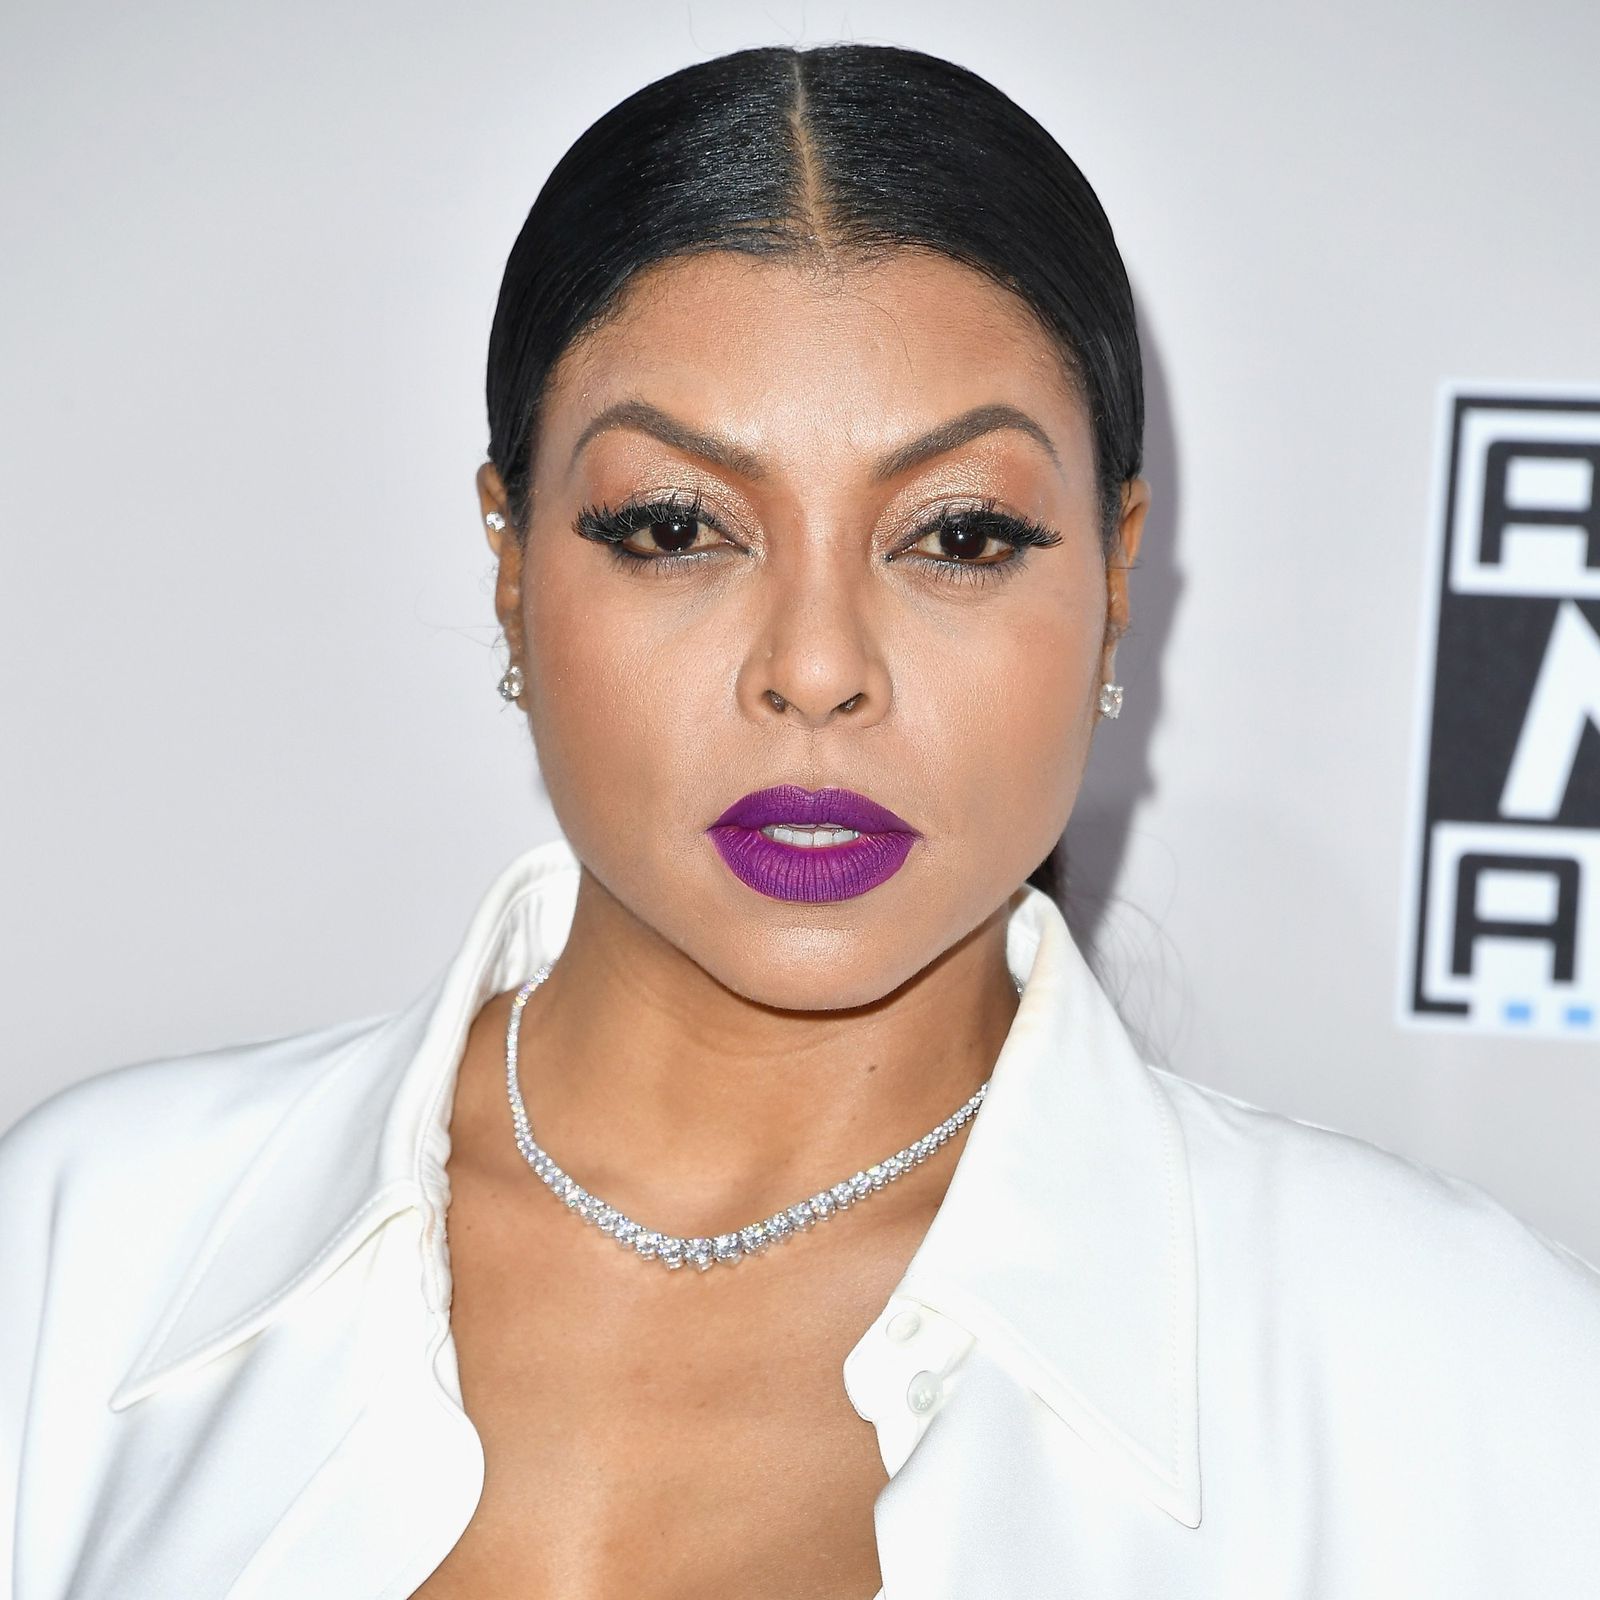 Taraji P Henson Tapped To Star In ‘What Men Want’